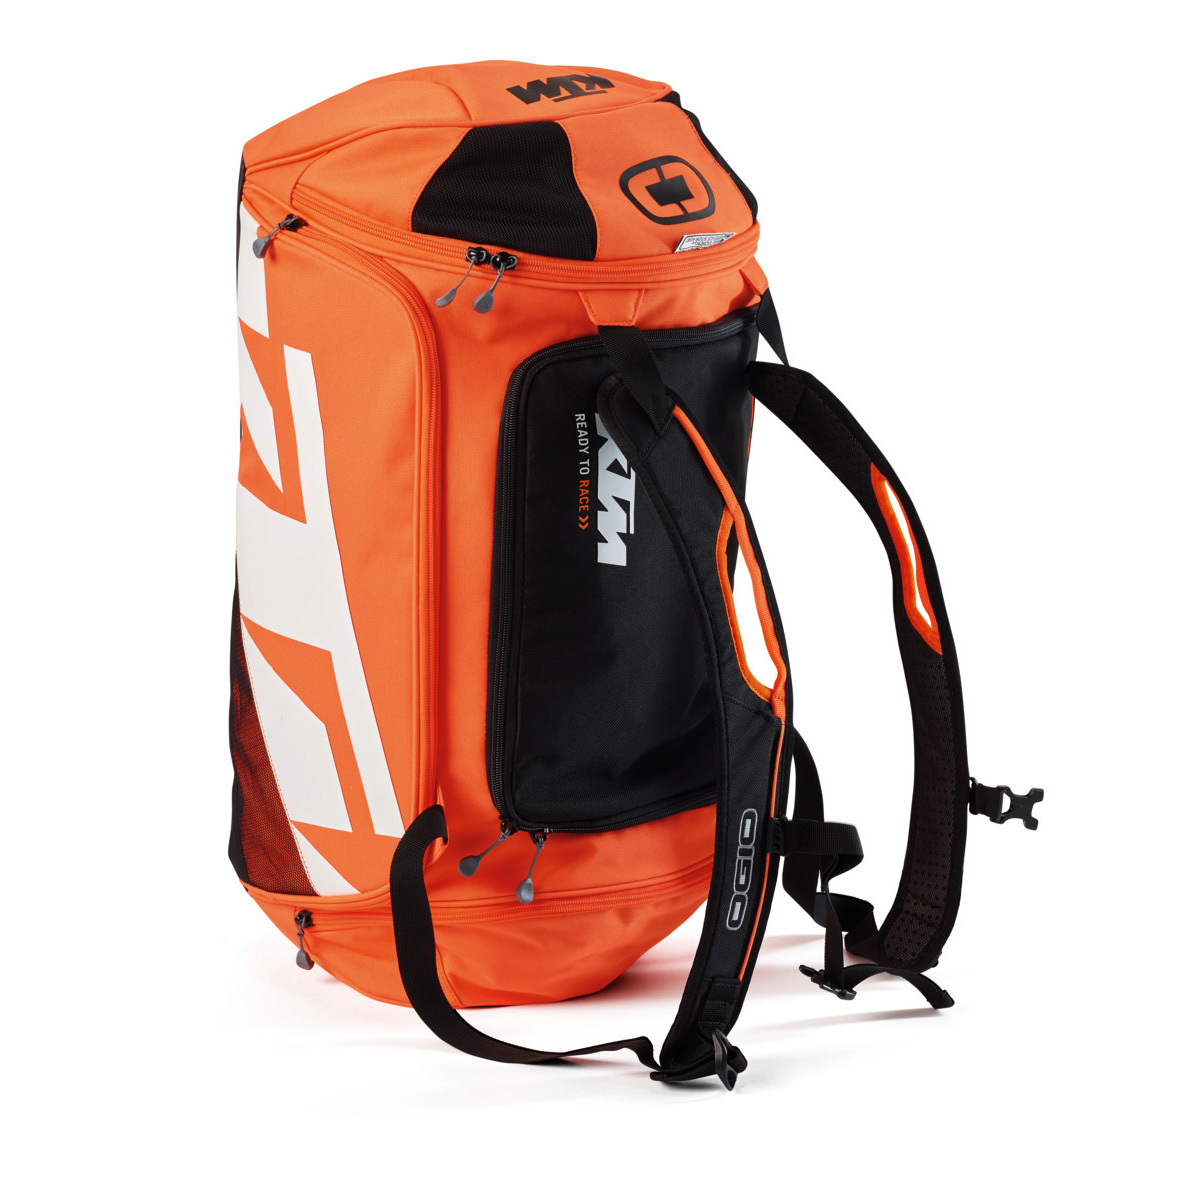 KTM Corporate Duffle Bag by Ogio